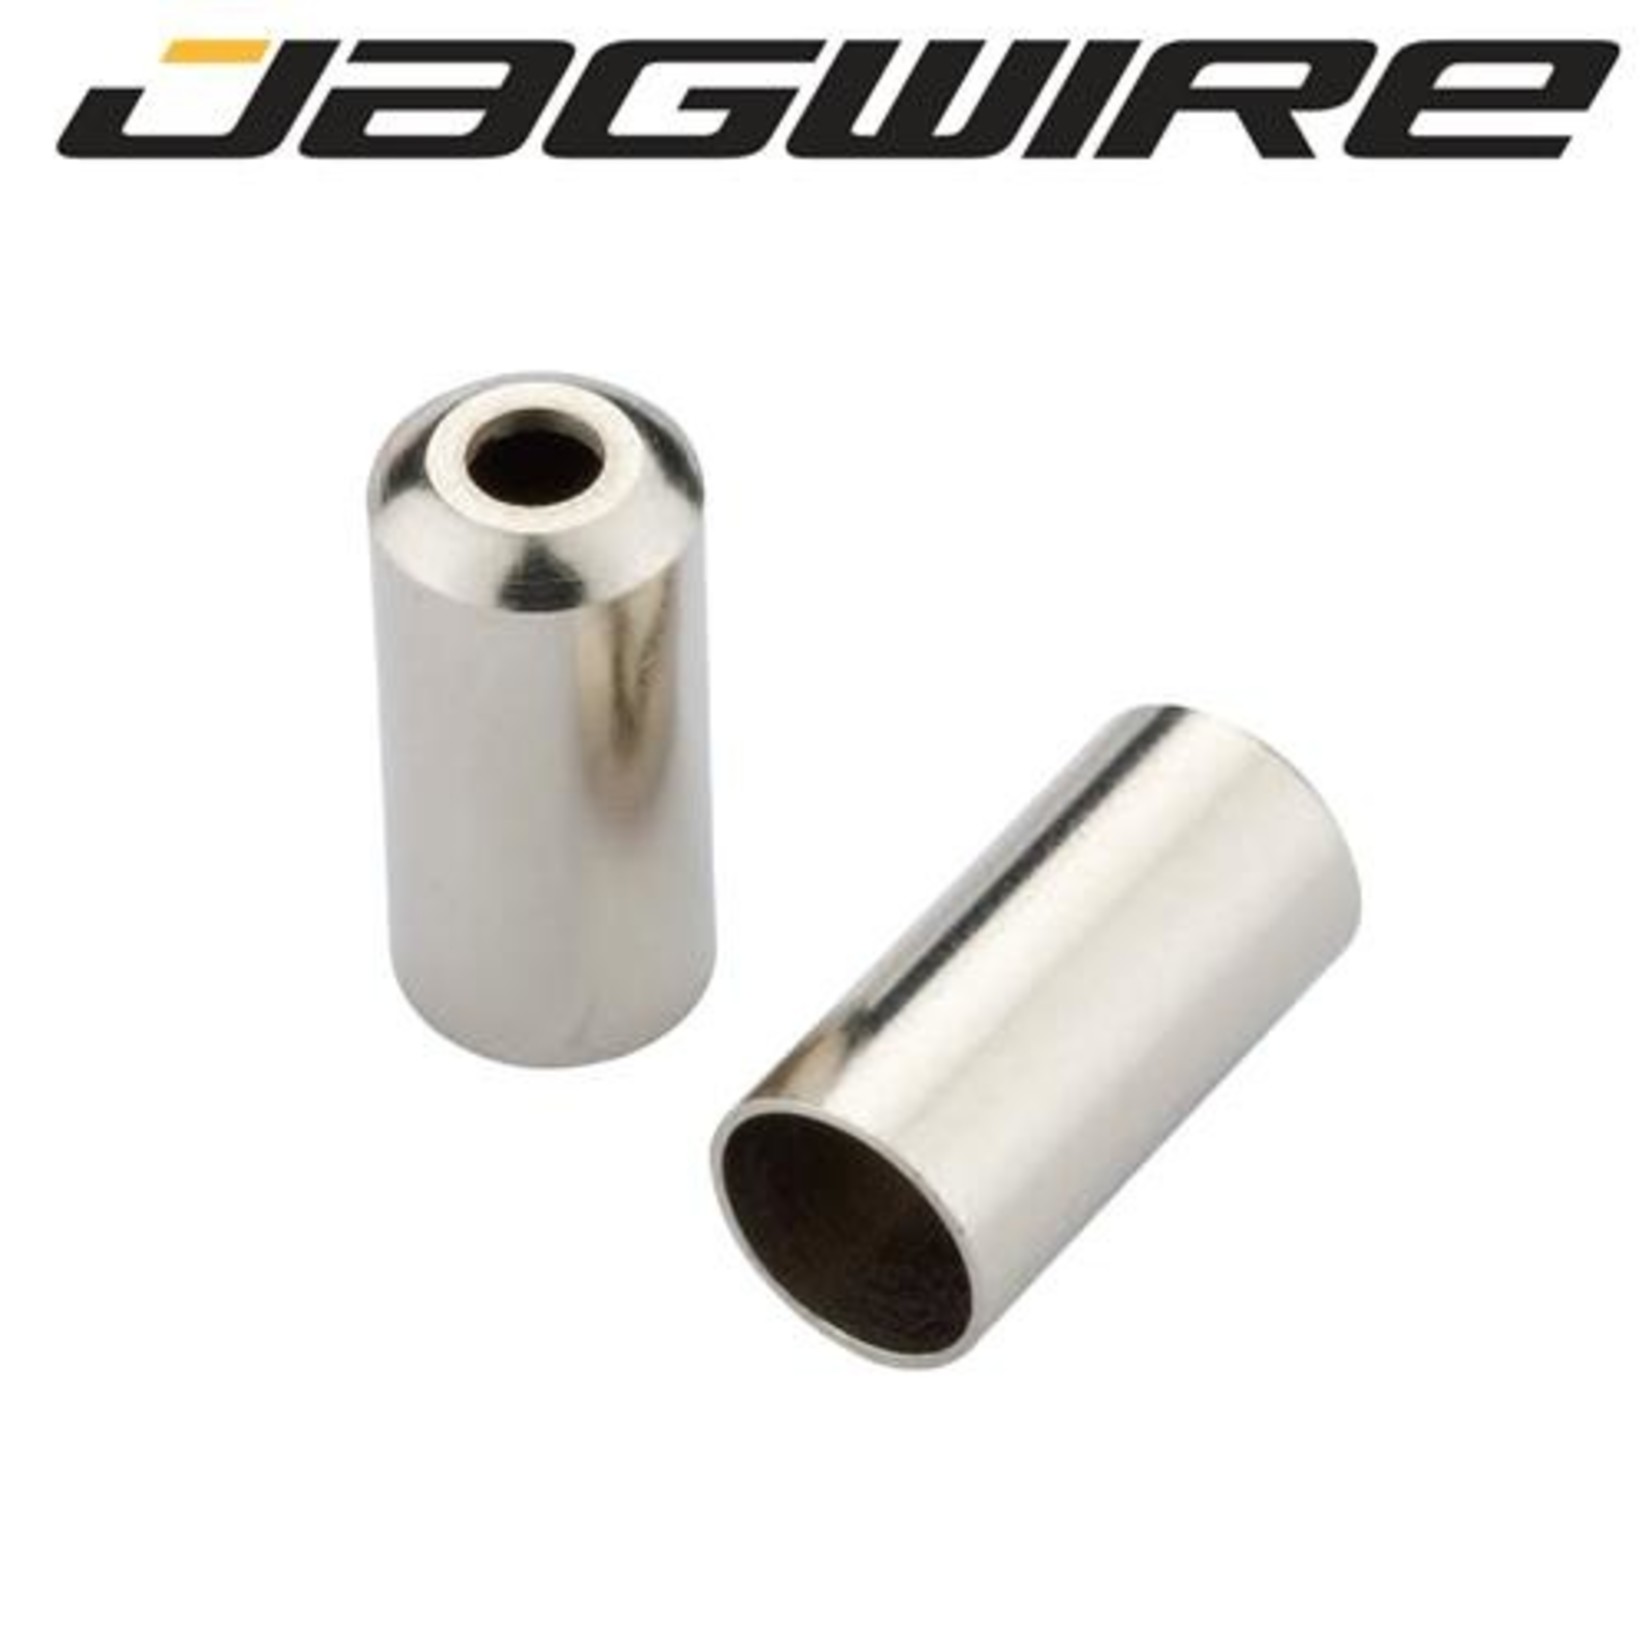 Jagwire Jagwire Bicycle Cable Ferrule - 5mm